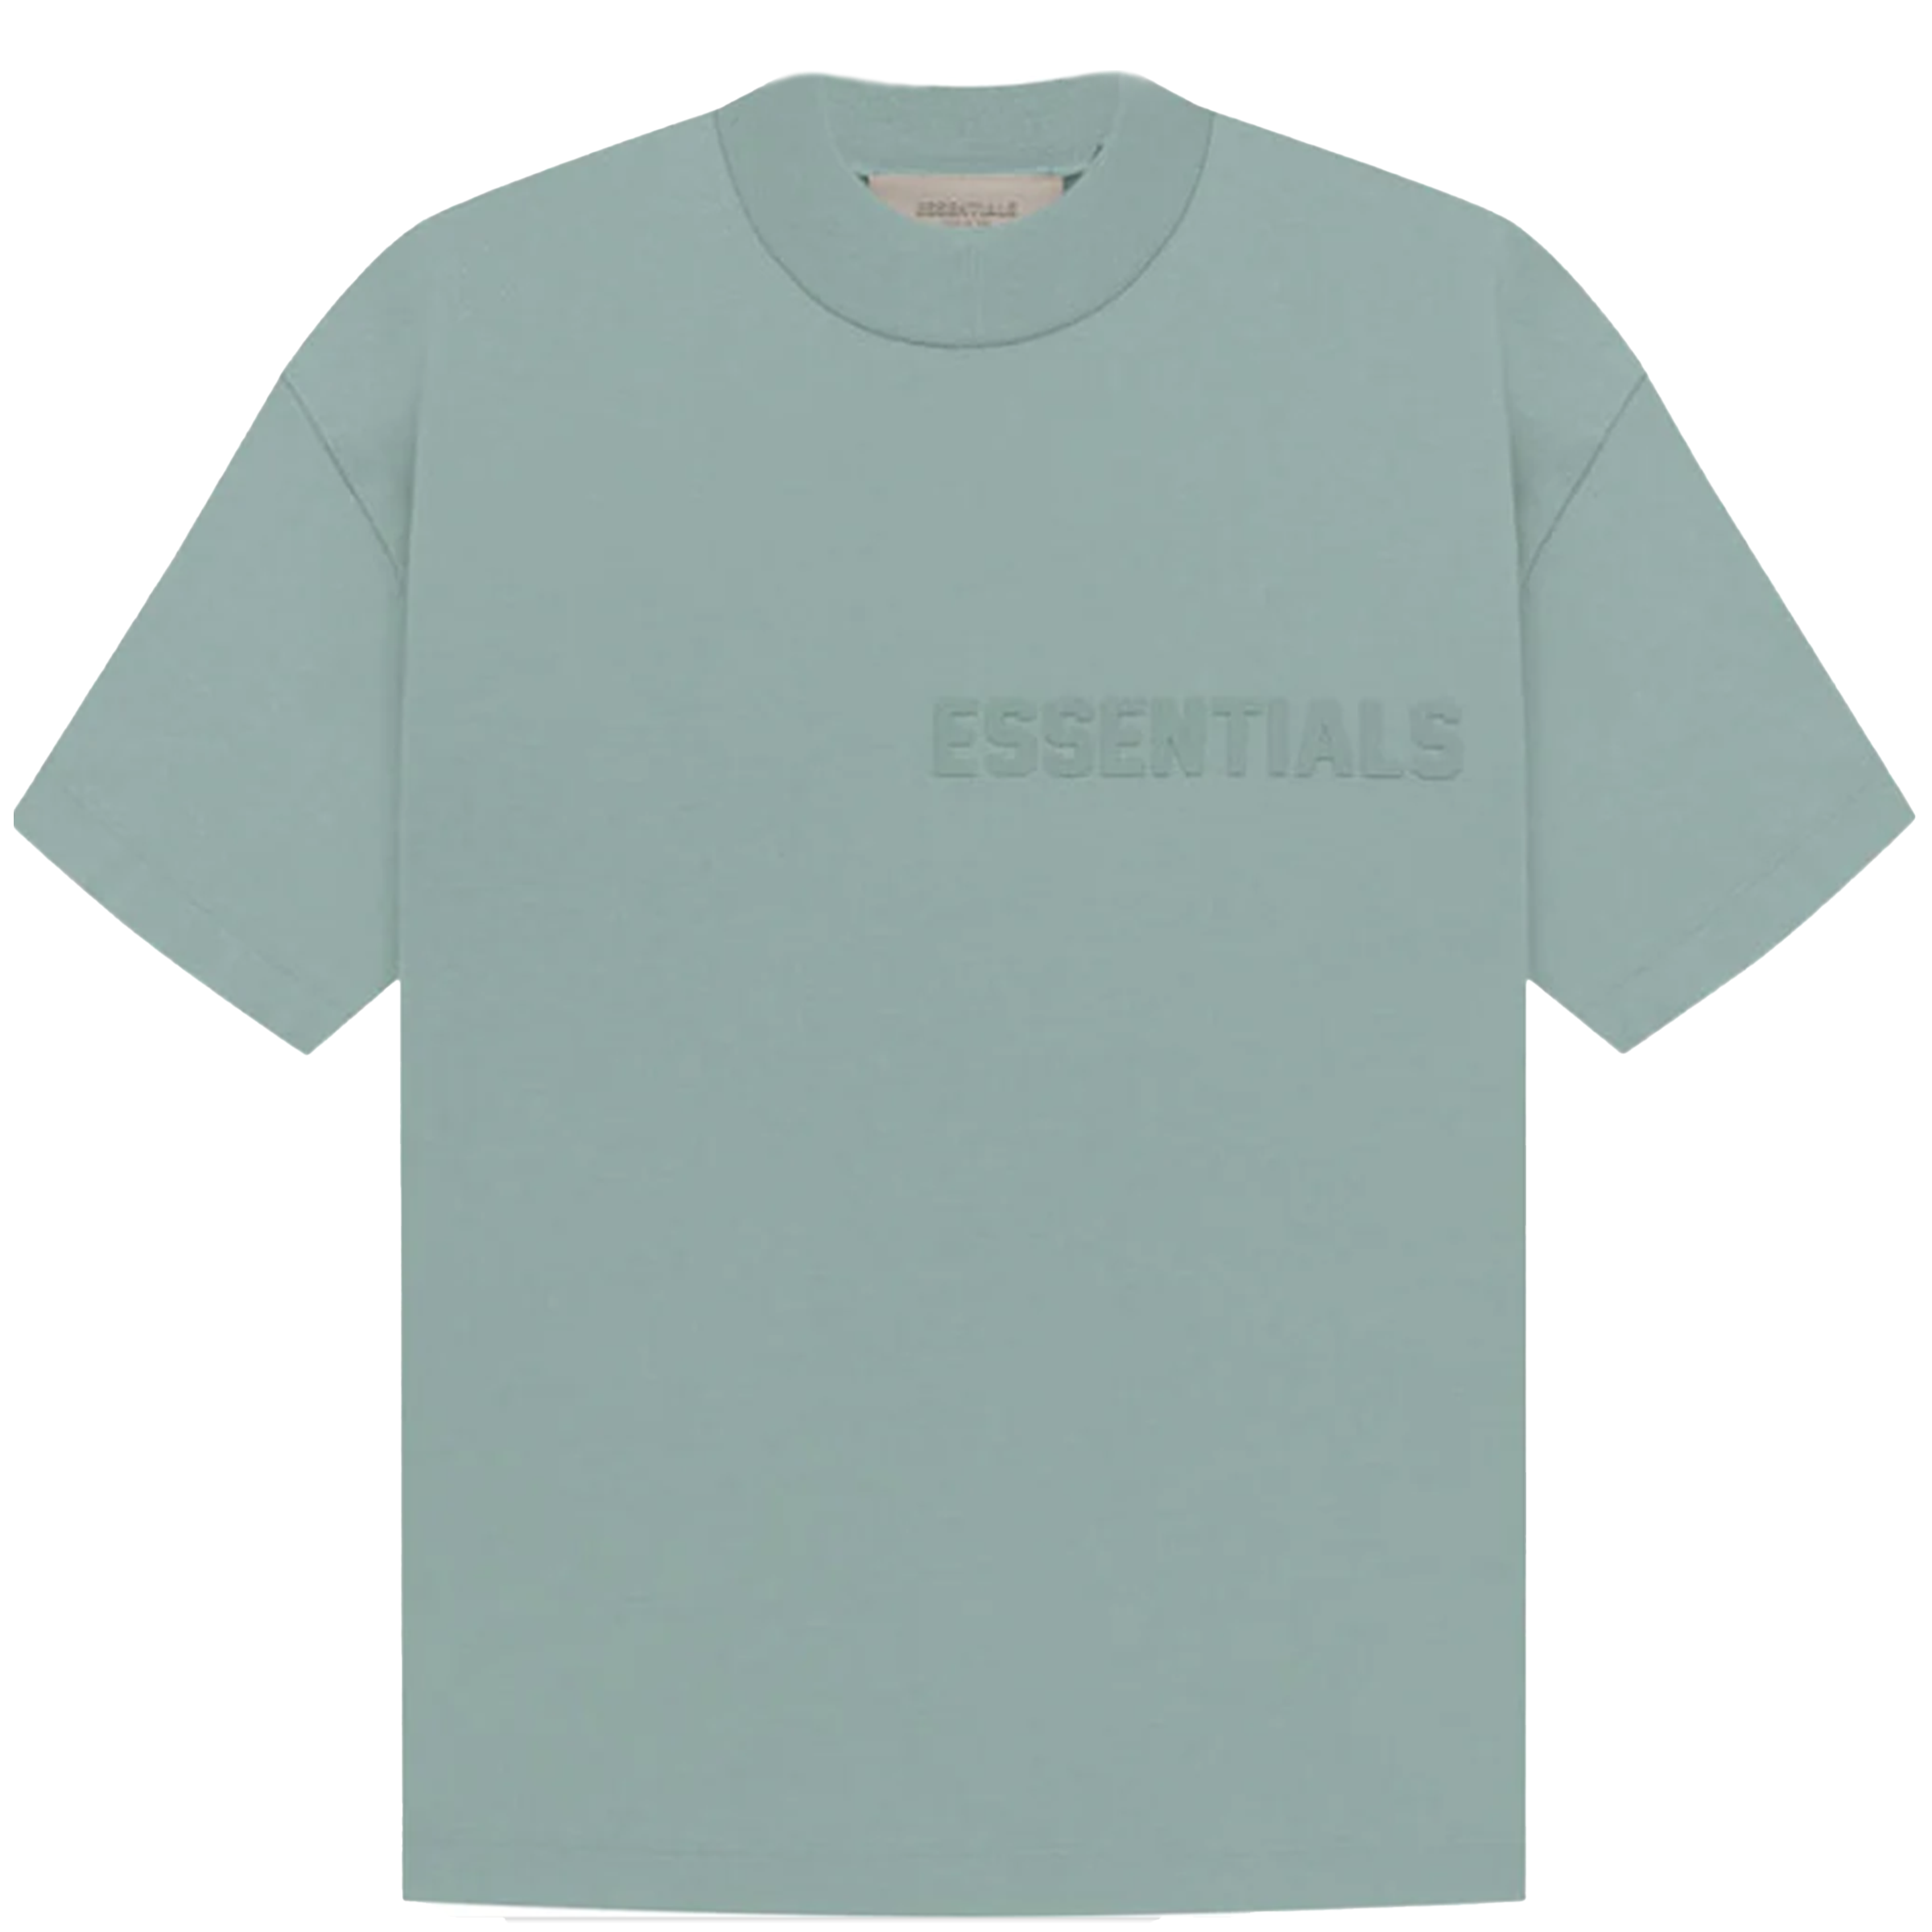 Fear Of God Essentials - "Essentials Spell-Out" T-Shirt